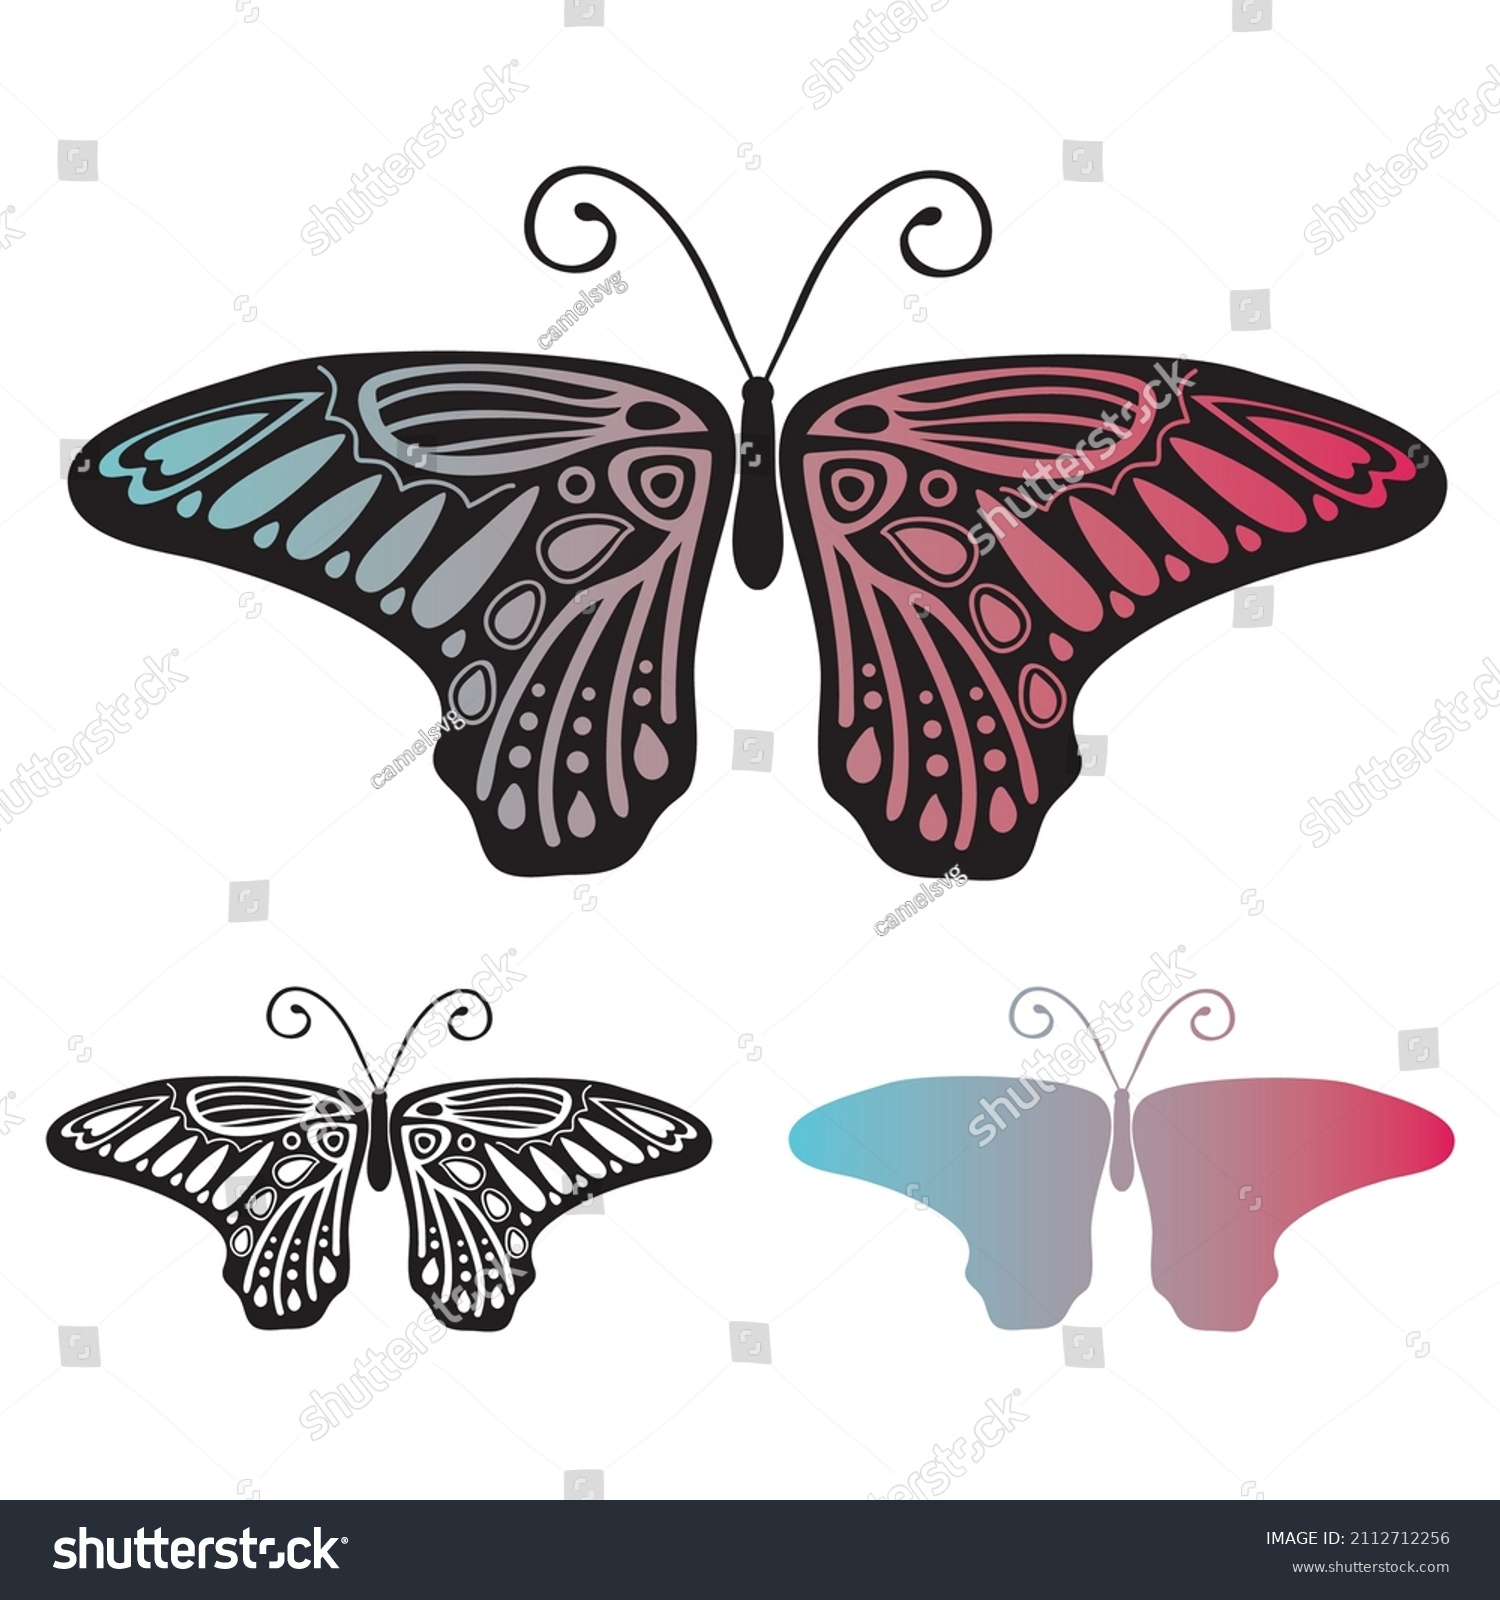 SVG of Butterfly File, Layered Butterfly Clipart, Butterflies, Easy To Layer Butterfly, Monarch svg